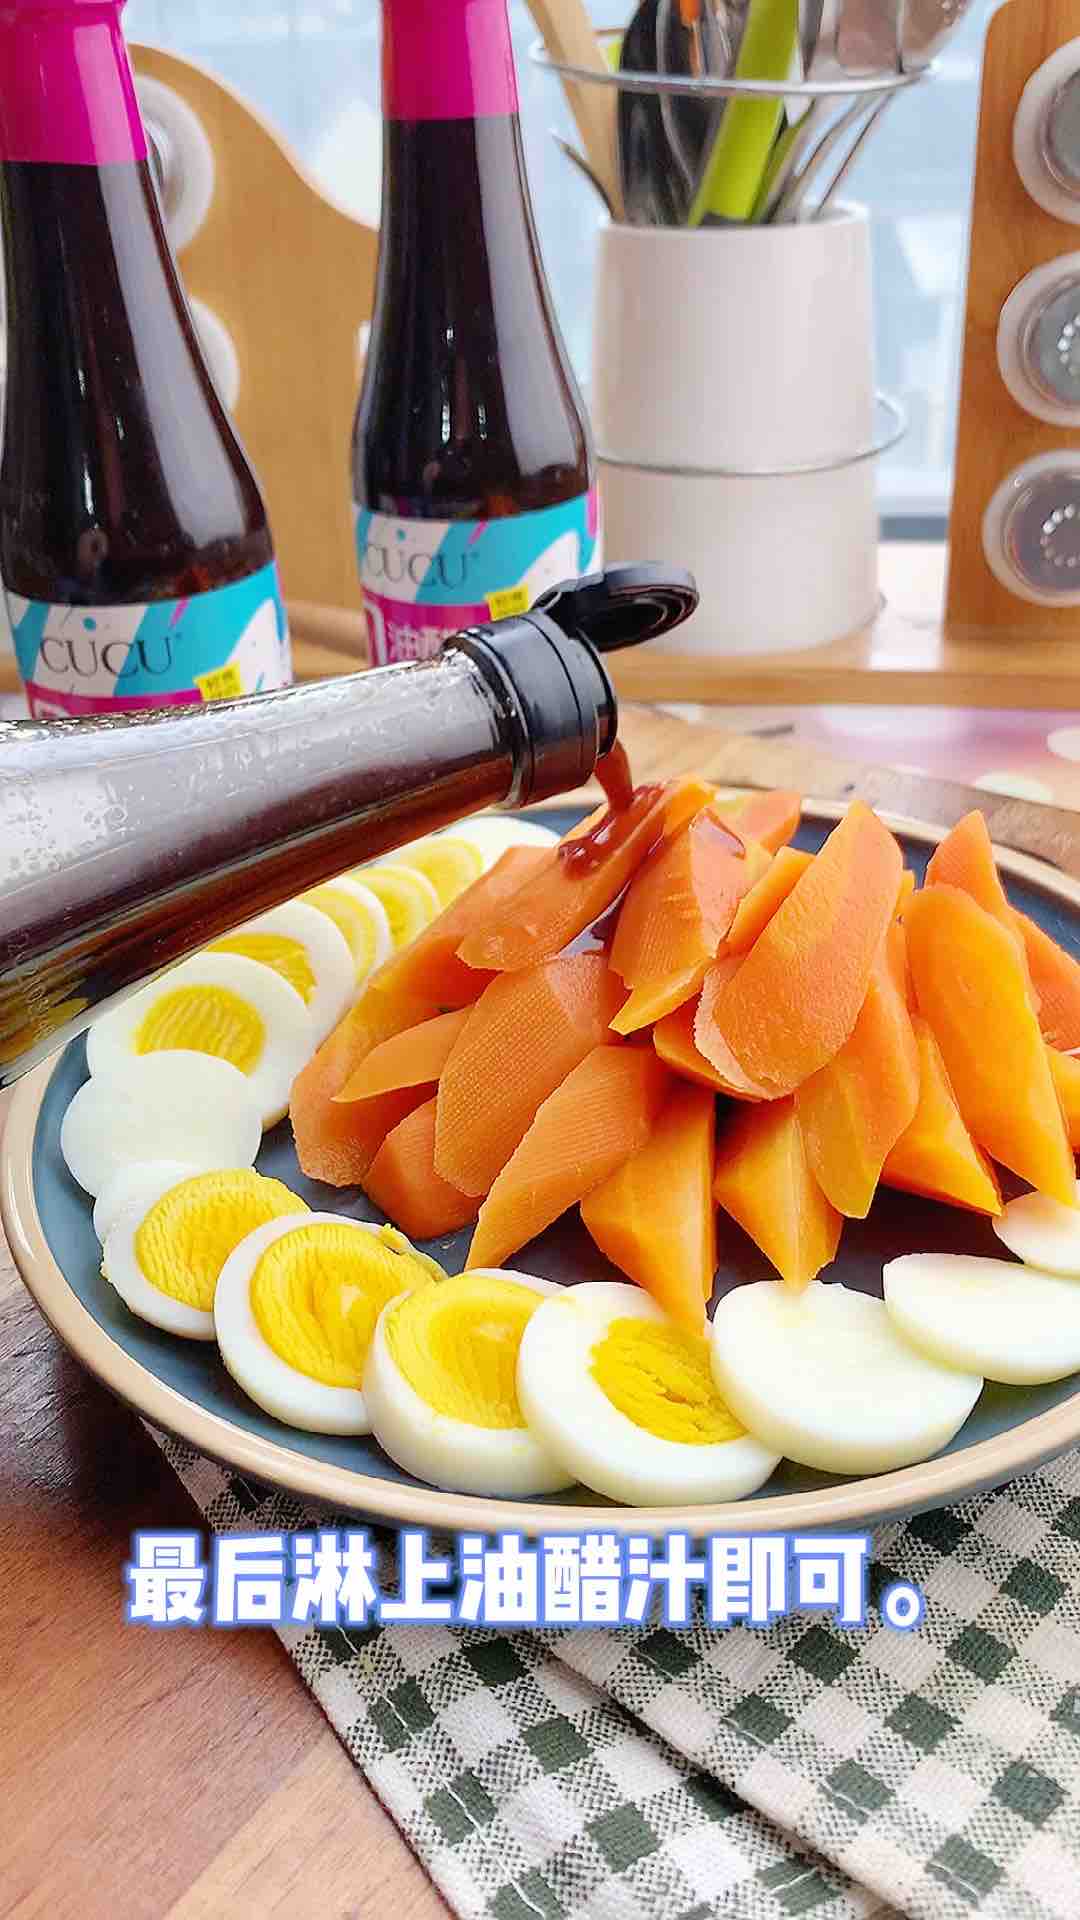 Eggs and Carrots in Oil and Vinegar recipe